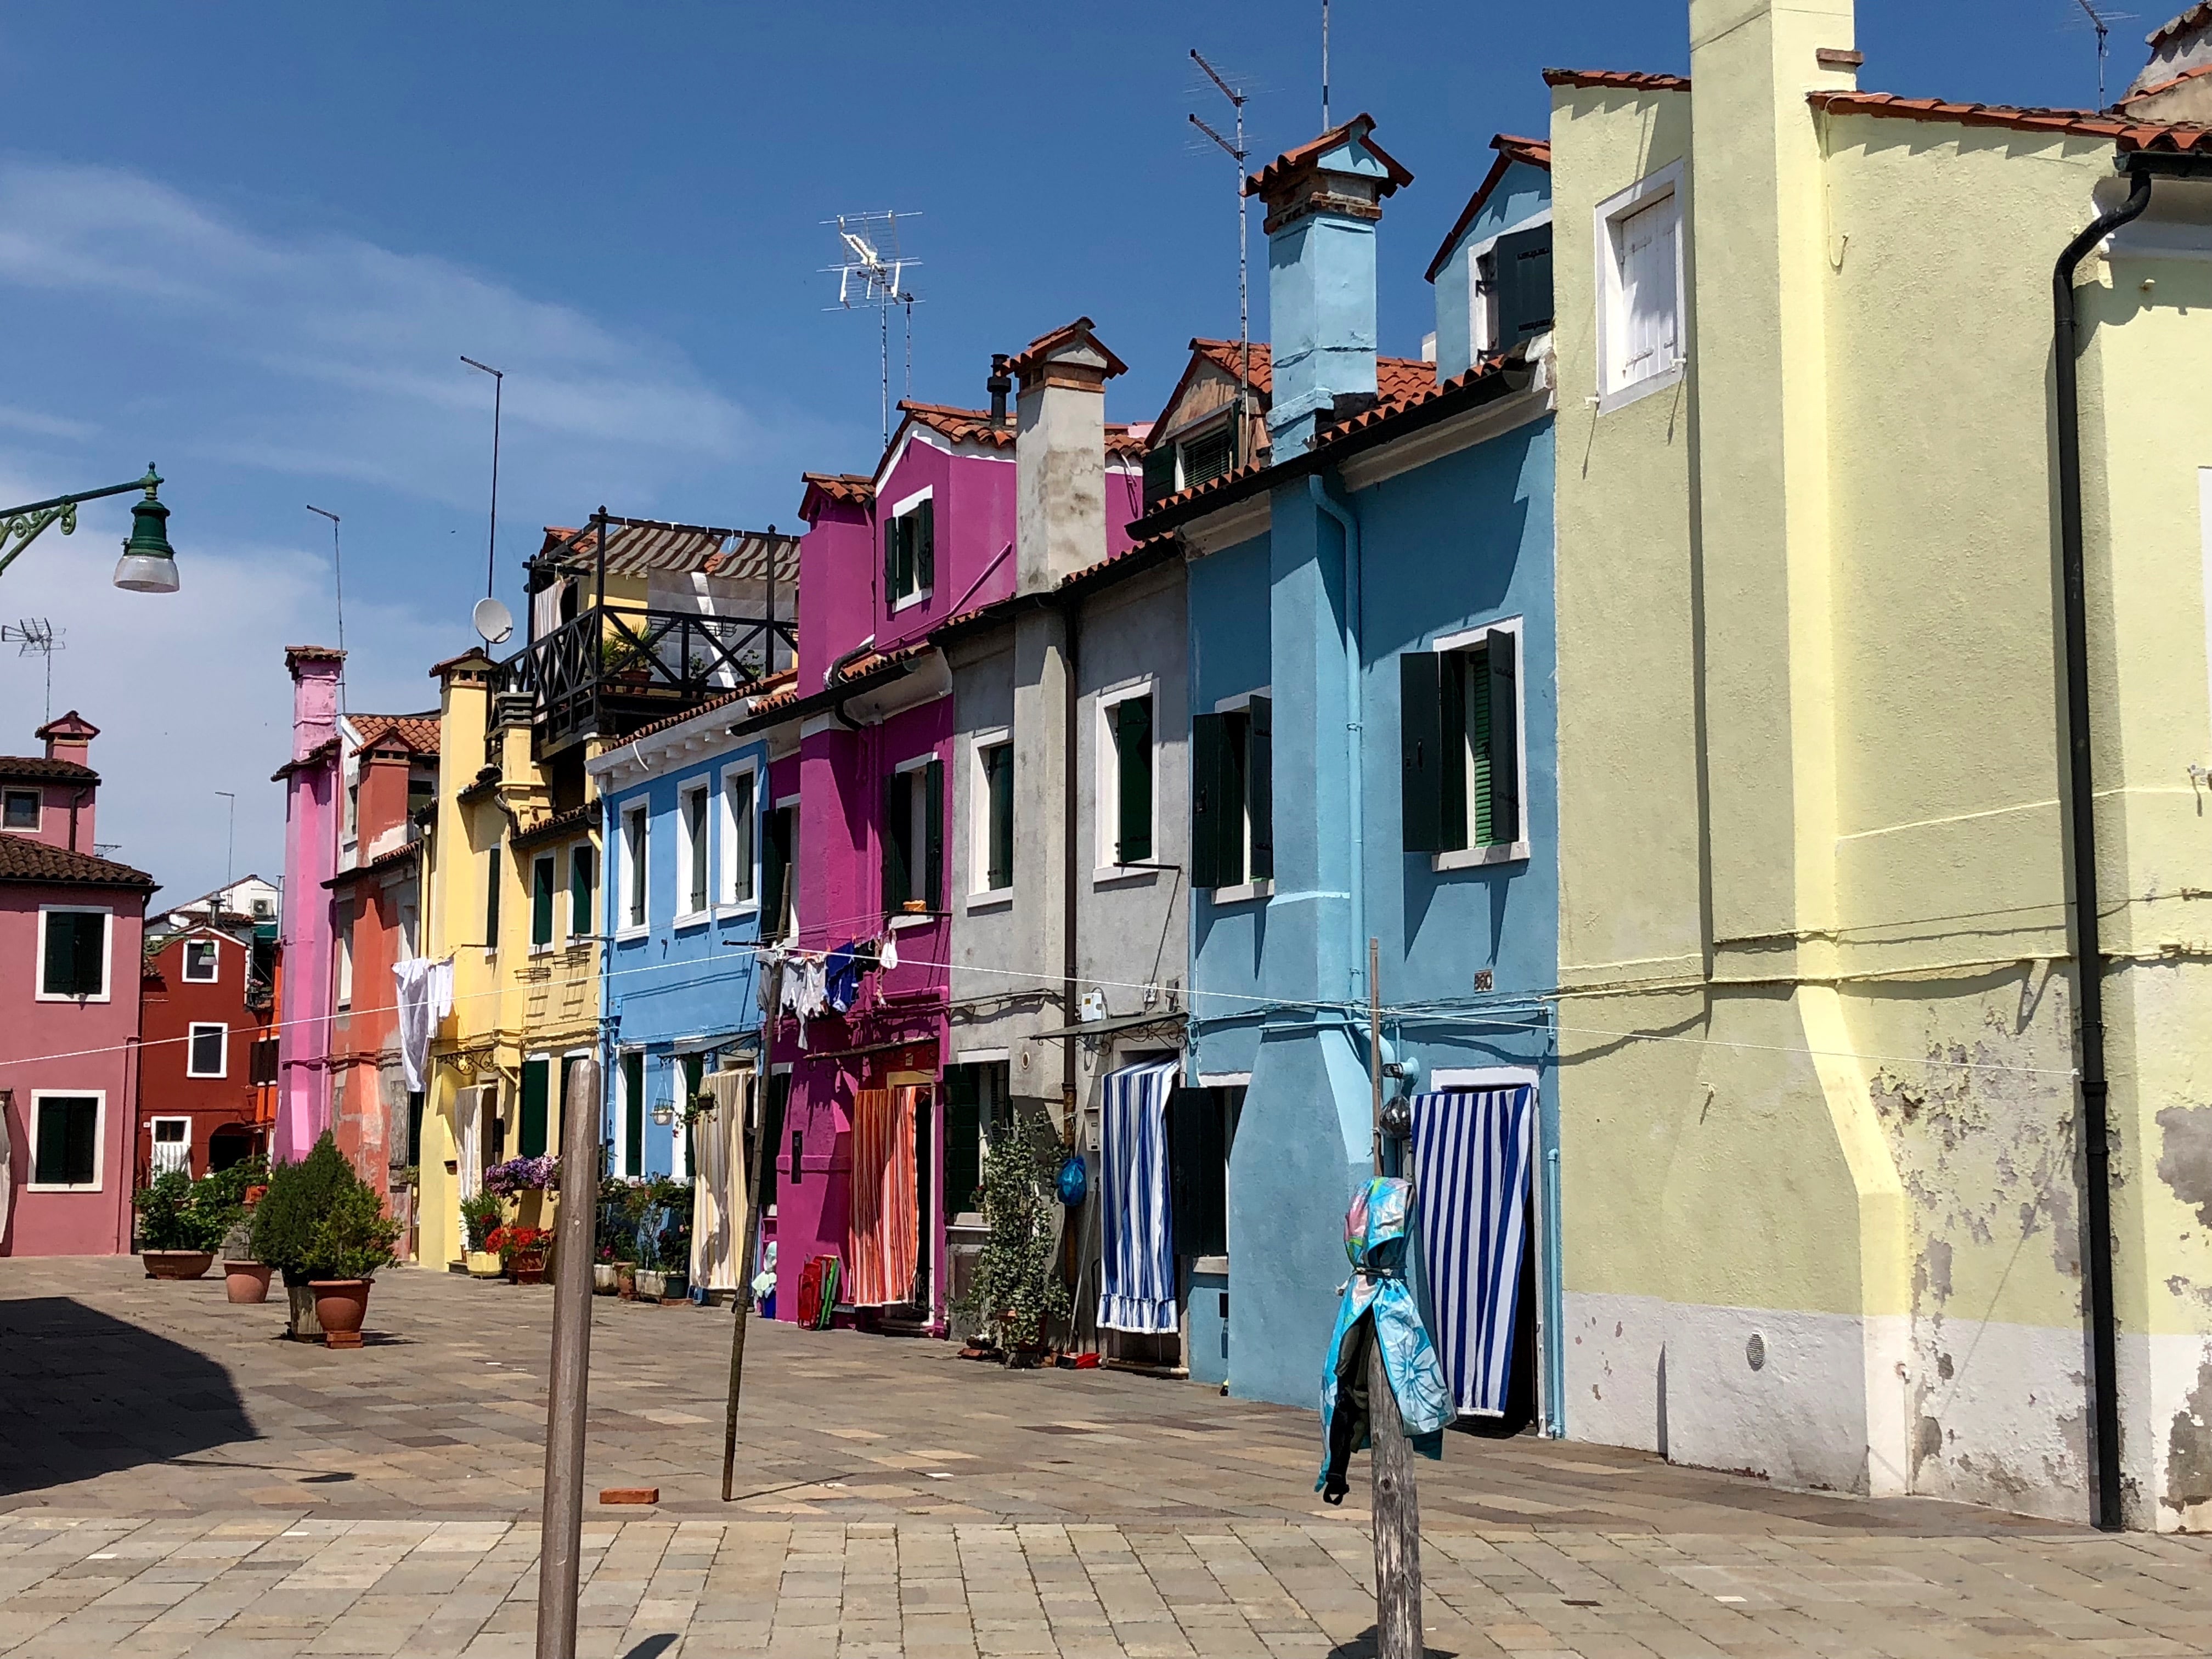 How to Get to Murano and Burano from Venice